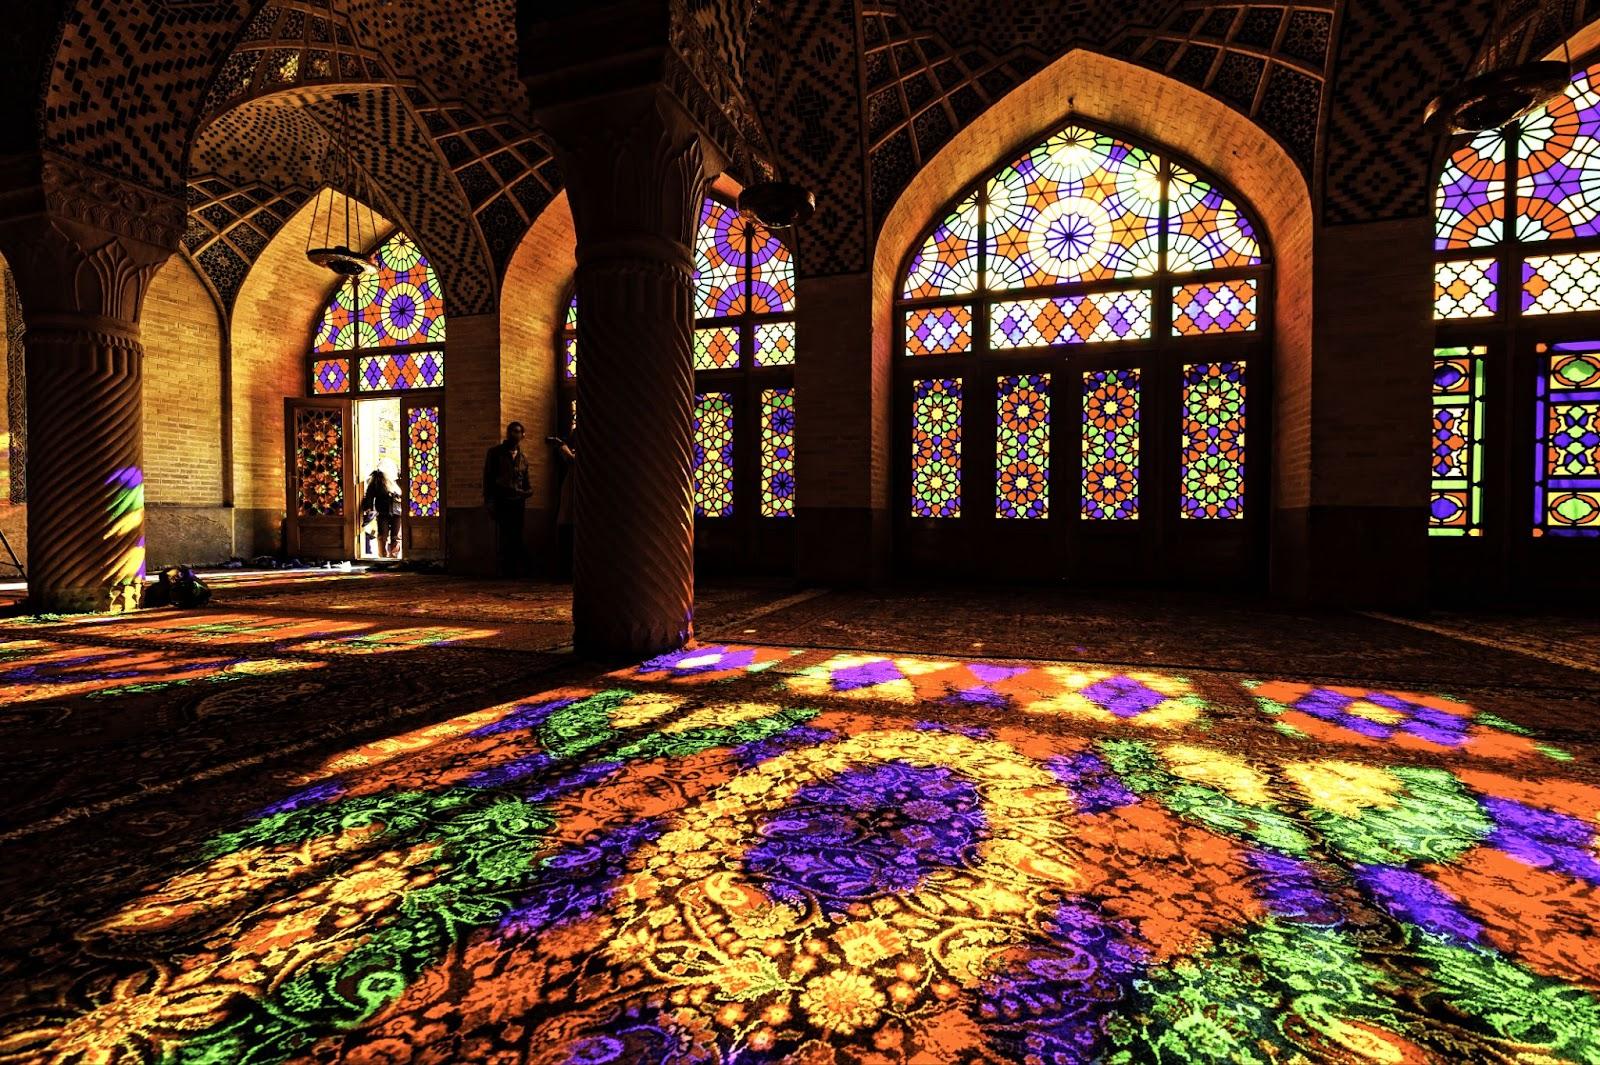 Nasir ol Molk Mosque is a traditional mosque in Shiraz, Iran. It is known as Masjed-e Naseer ol Molk in Persian and was built in 1876 - 1888